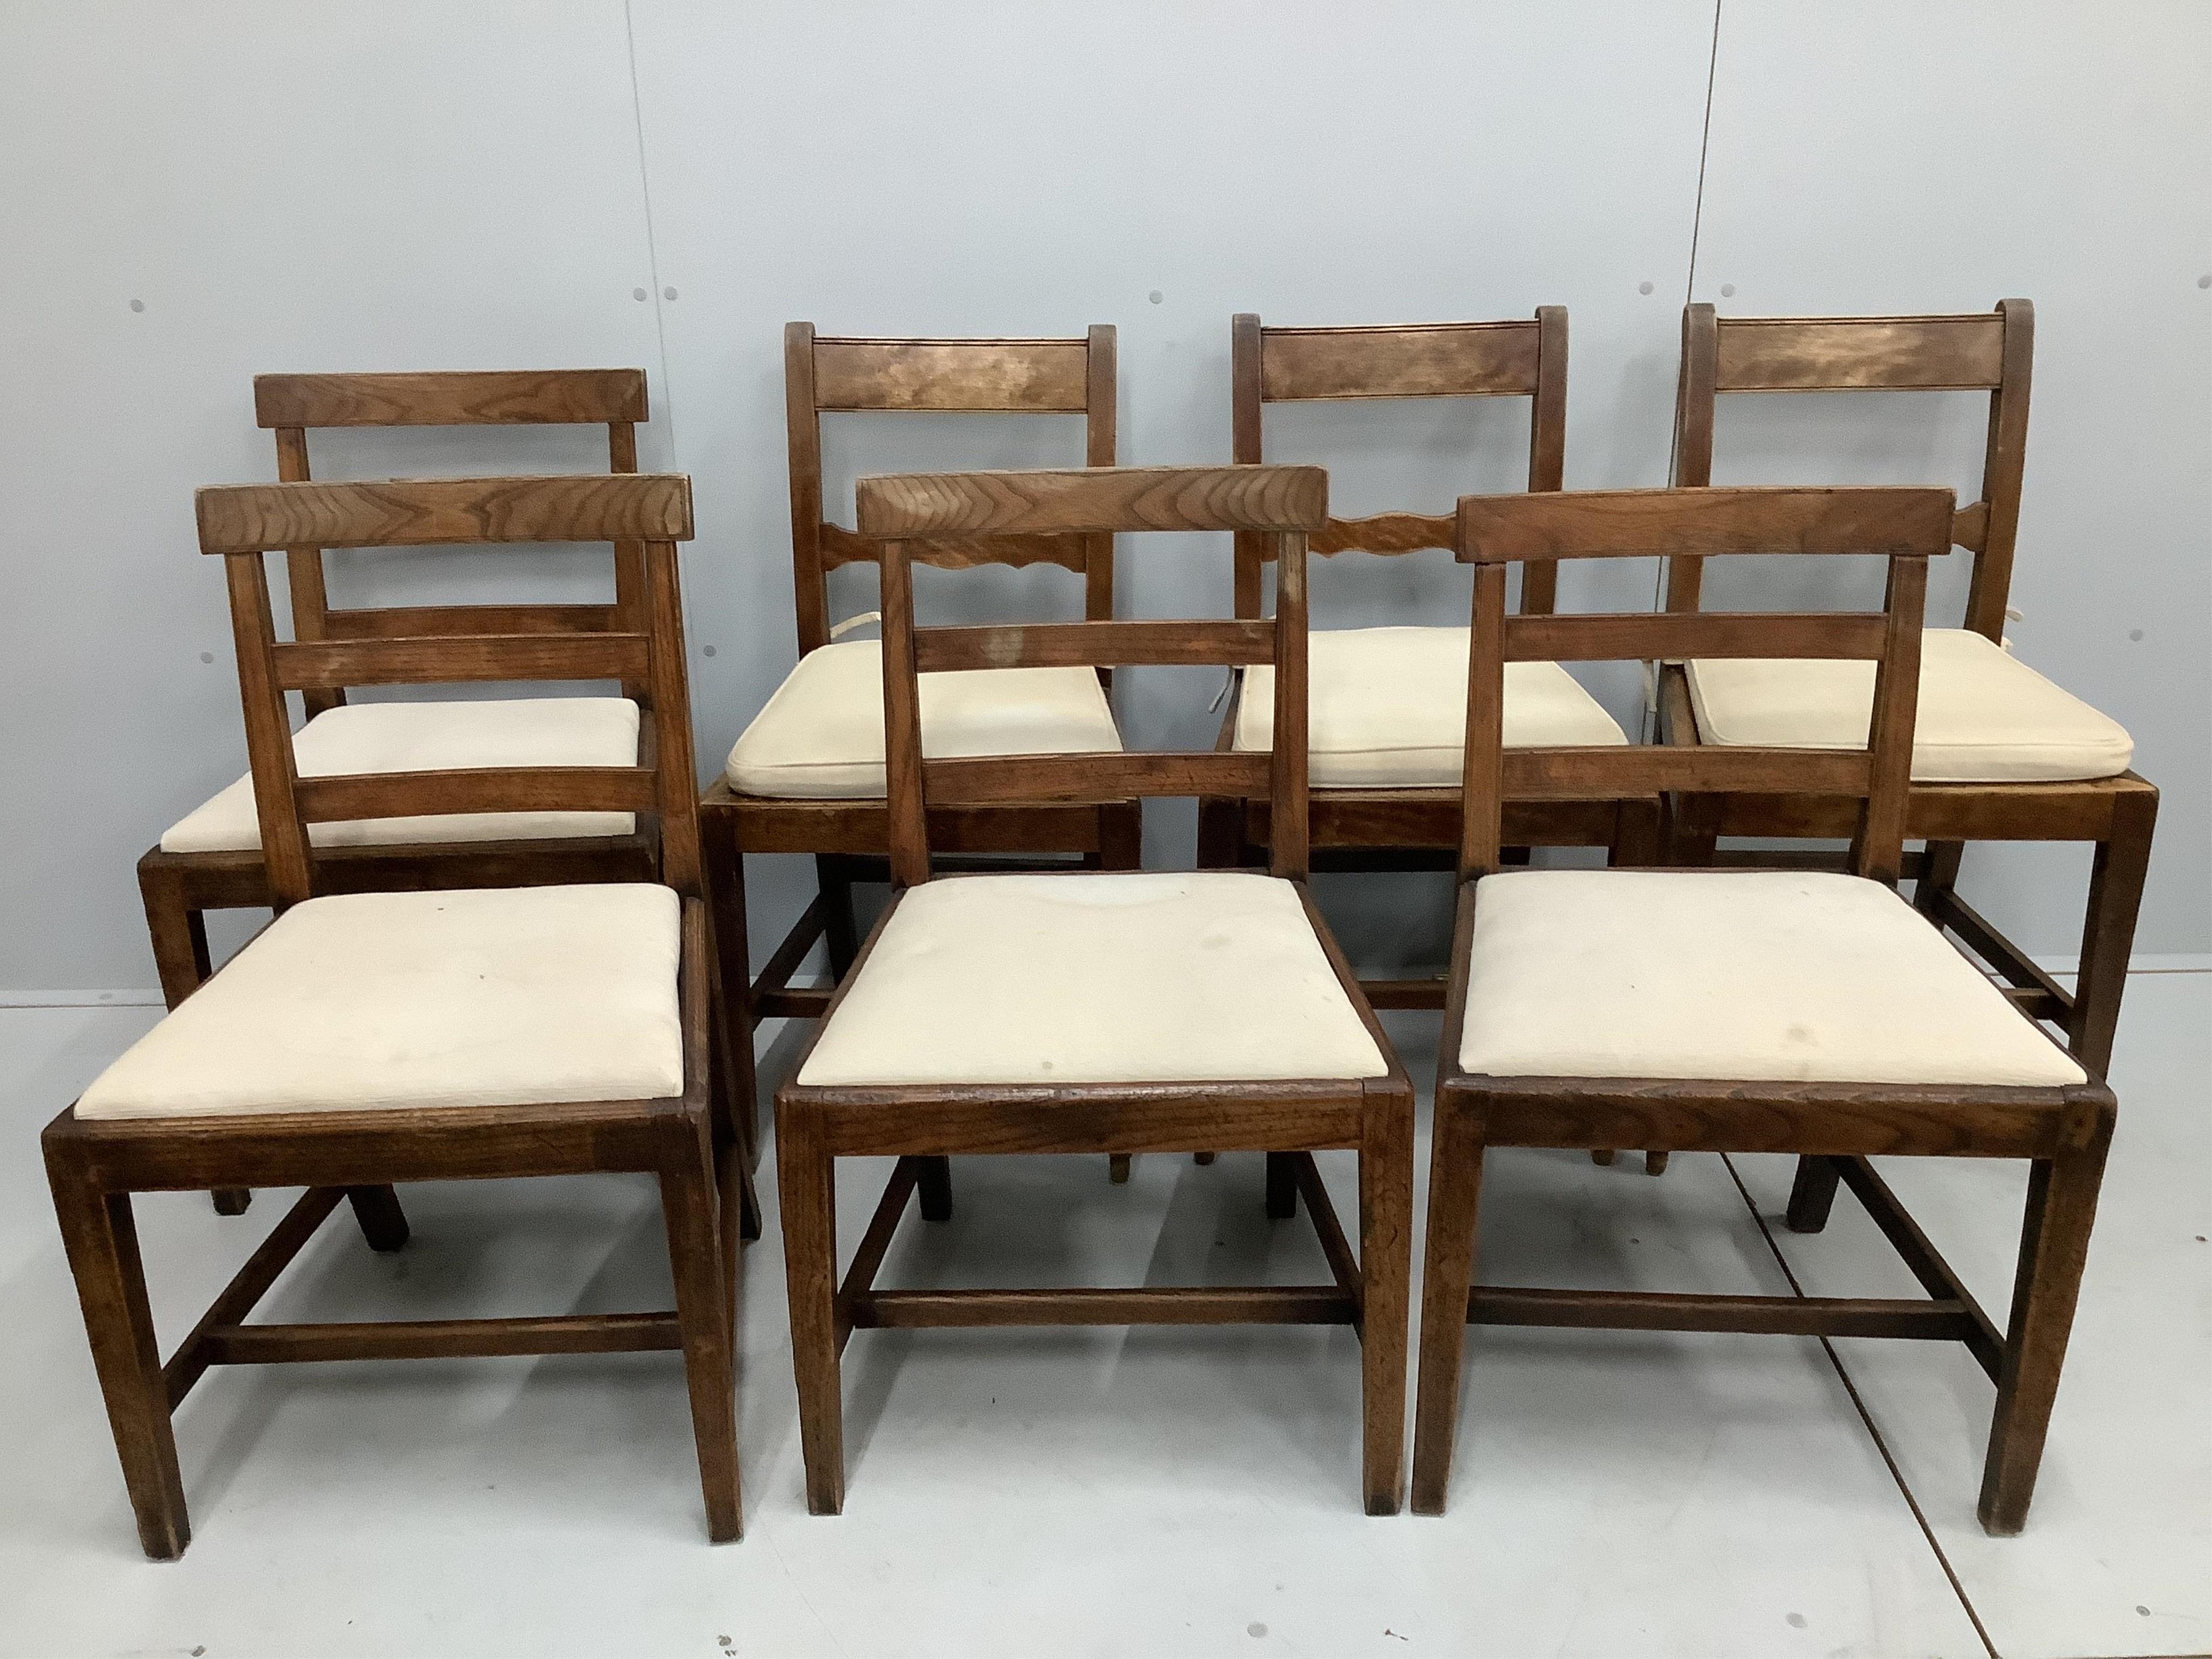 A harlequin set of seven early 19th century provincial elm and fruitwood dining chairs. Condition - fair